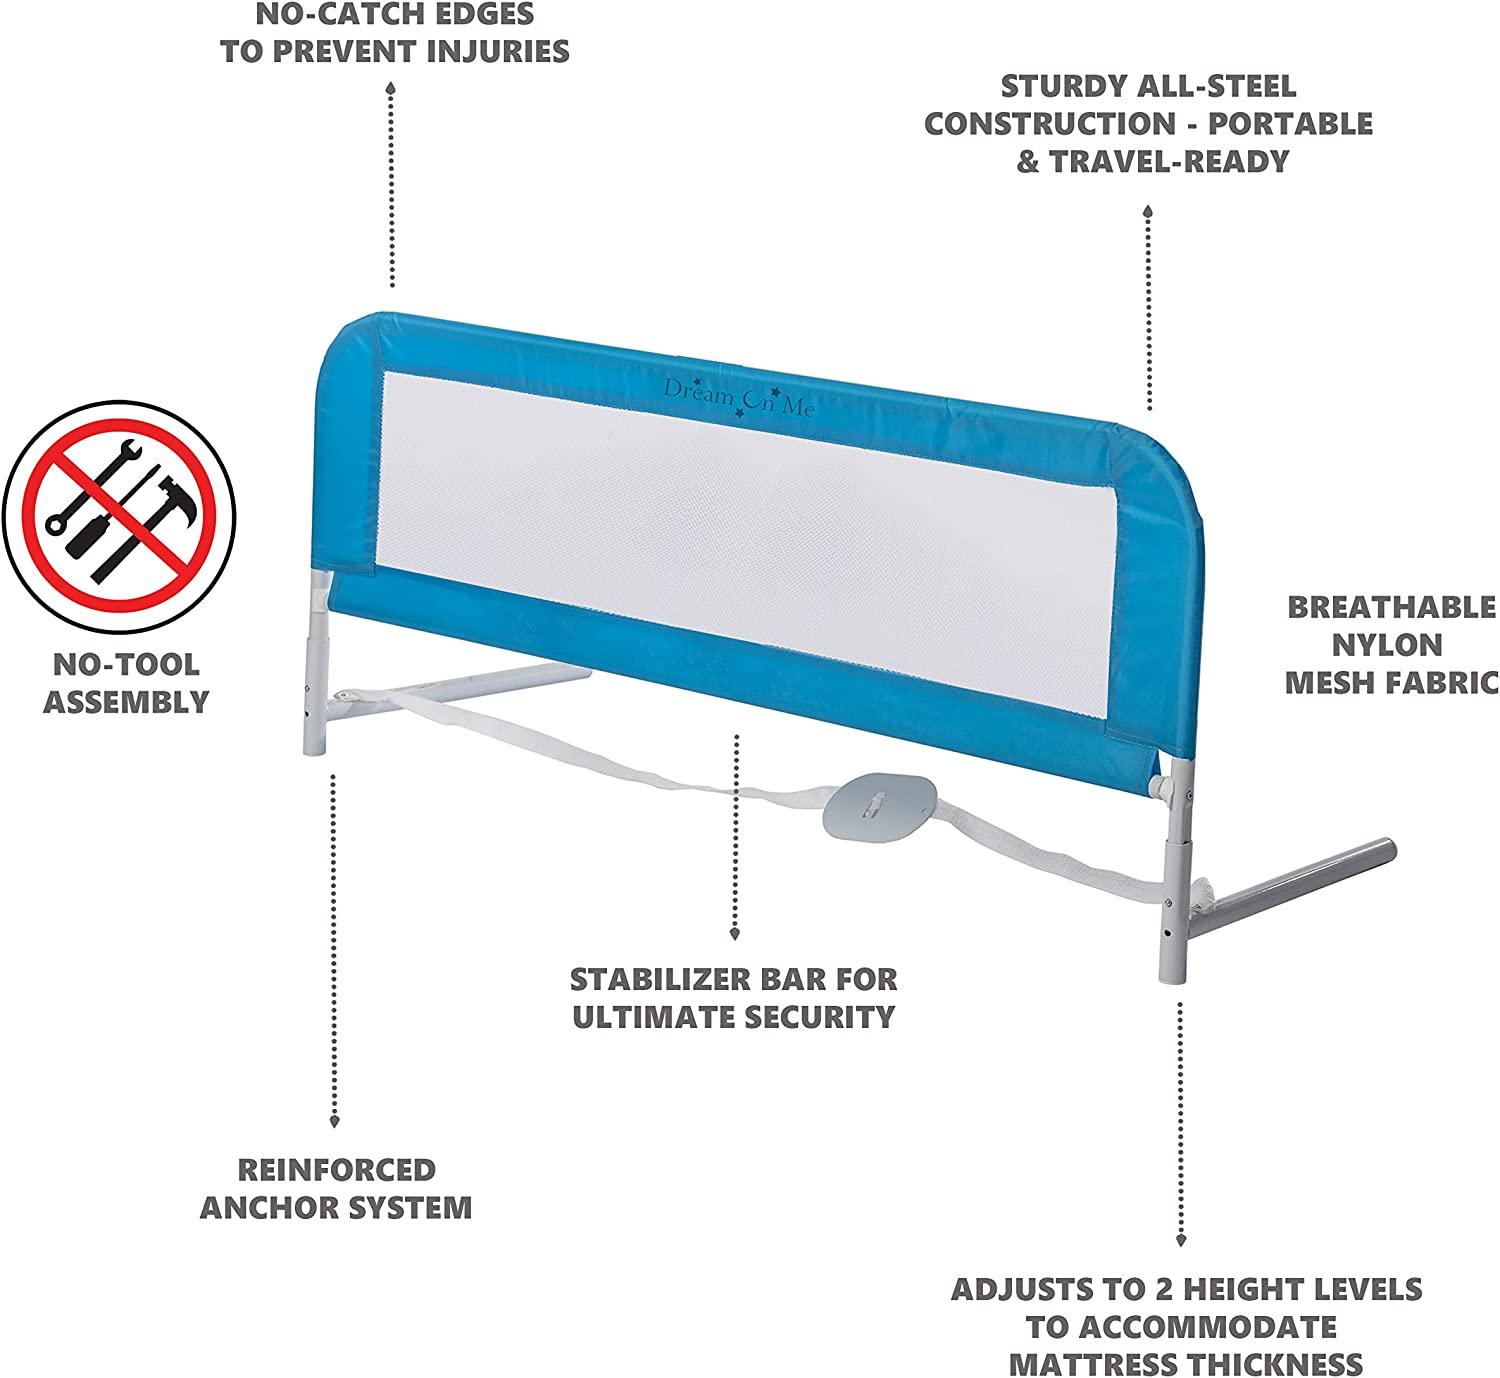 Dream On Me BLUE Deluxe Bed Rail SEE DESCRIPTION AND PICTURES